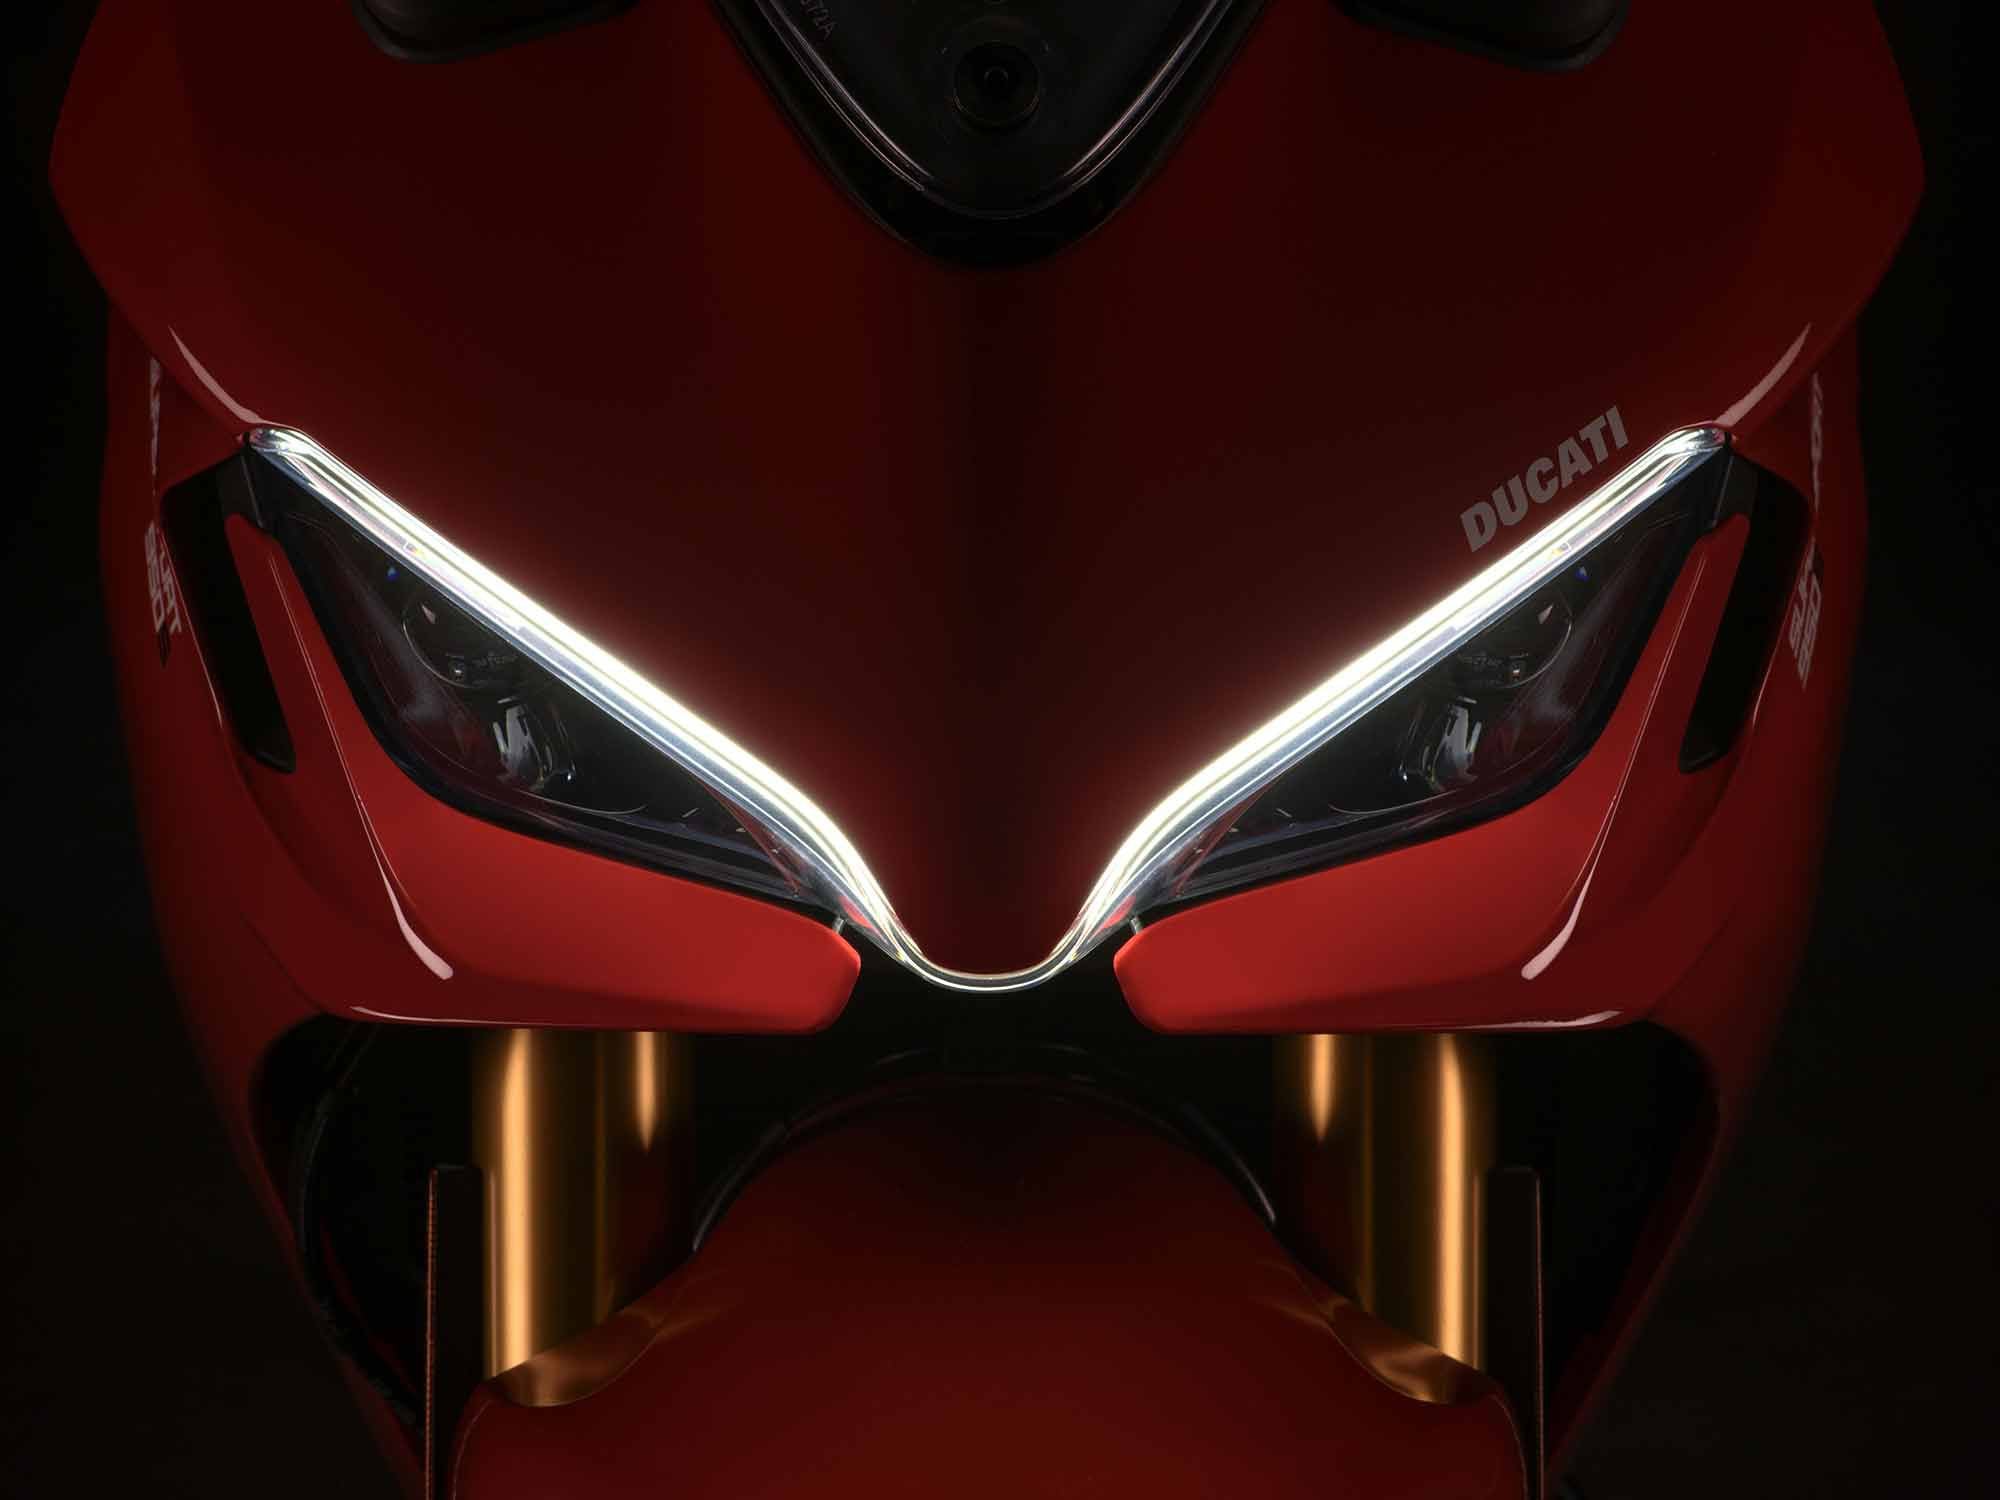 At a quick glance, it could be a 1099/1199/899 Panigale.